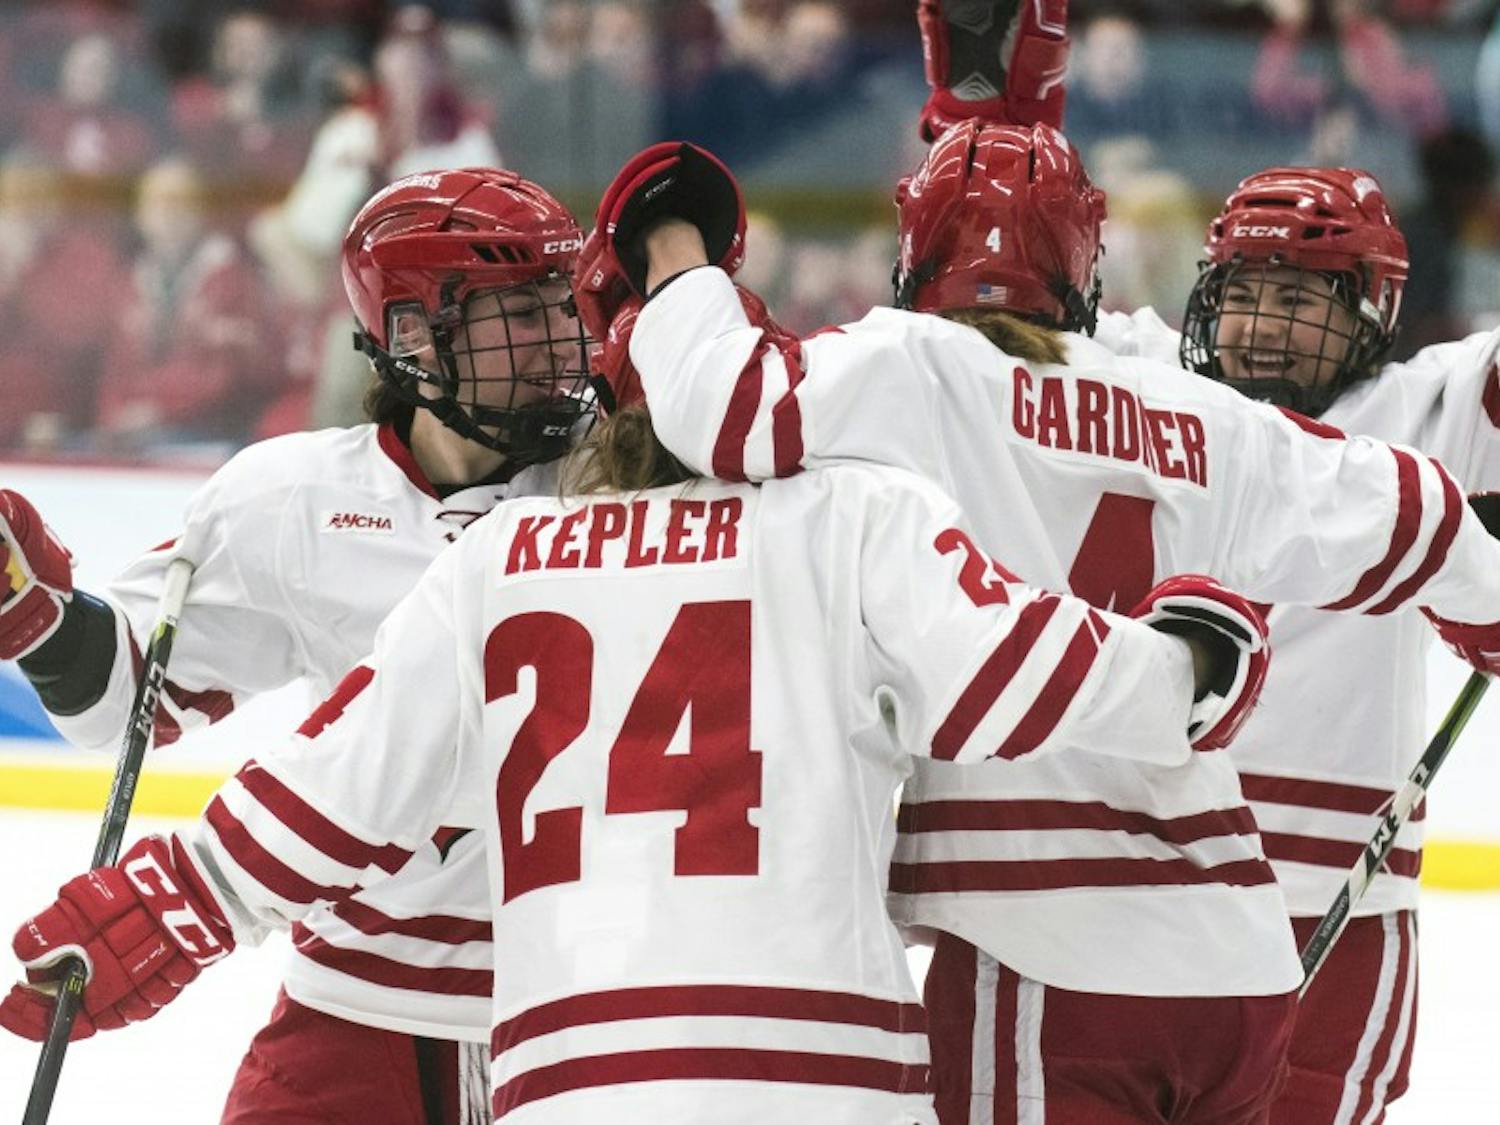 After winning the national championship last season, the Badgers have their sights set high again this year.